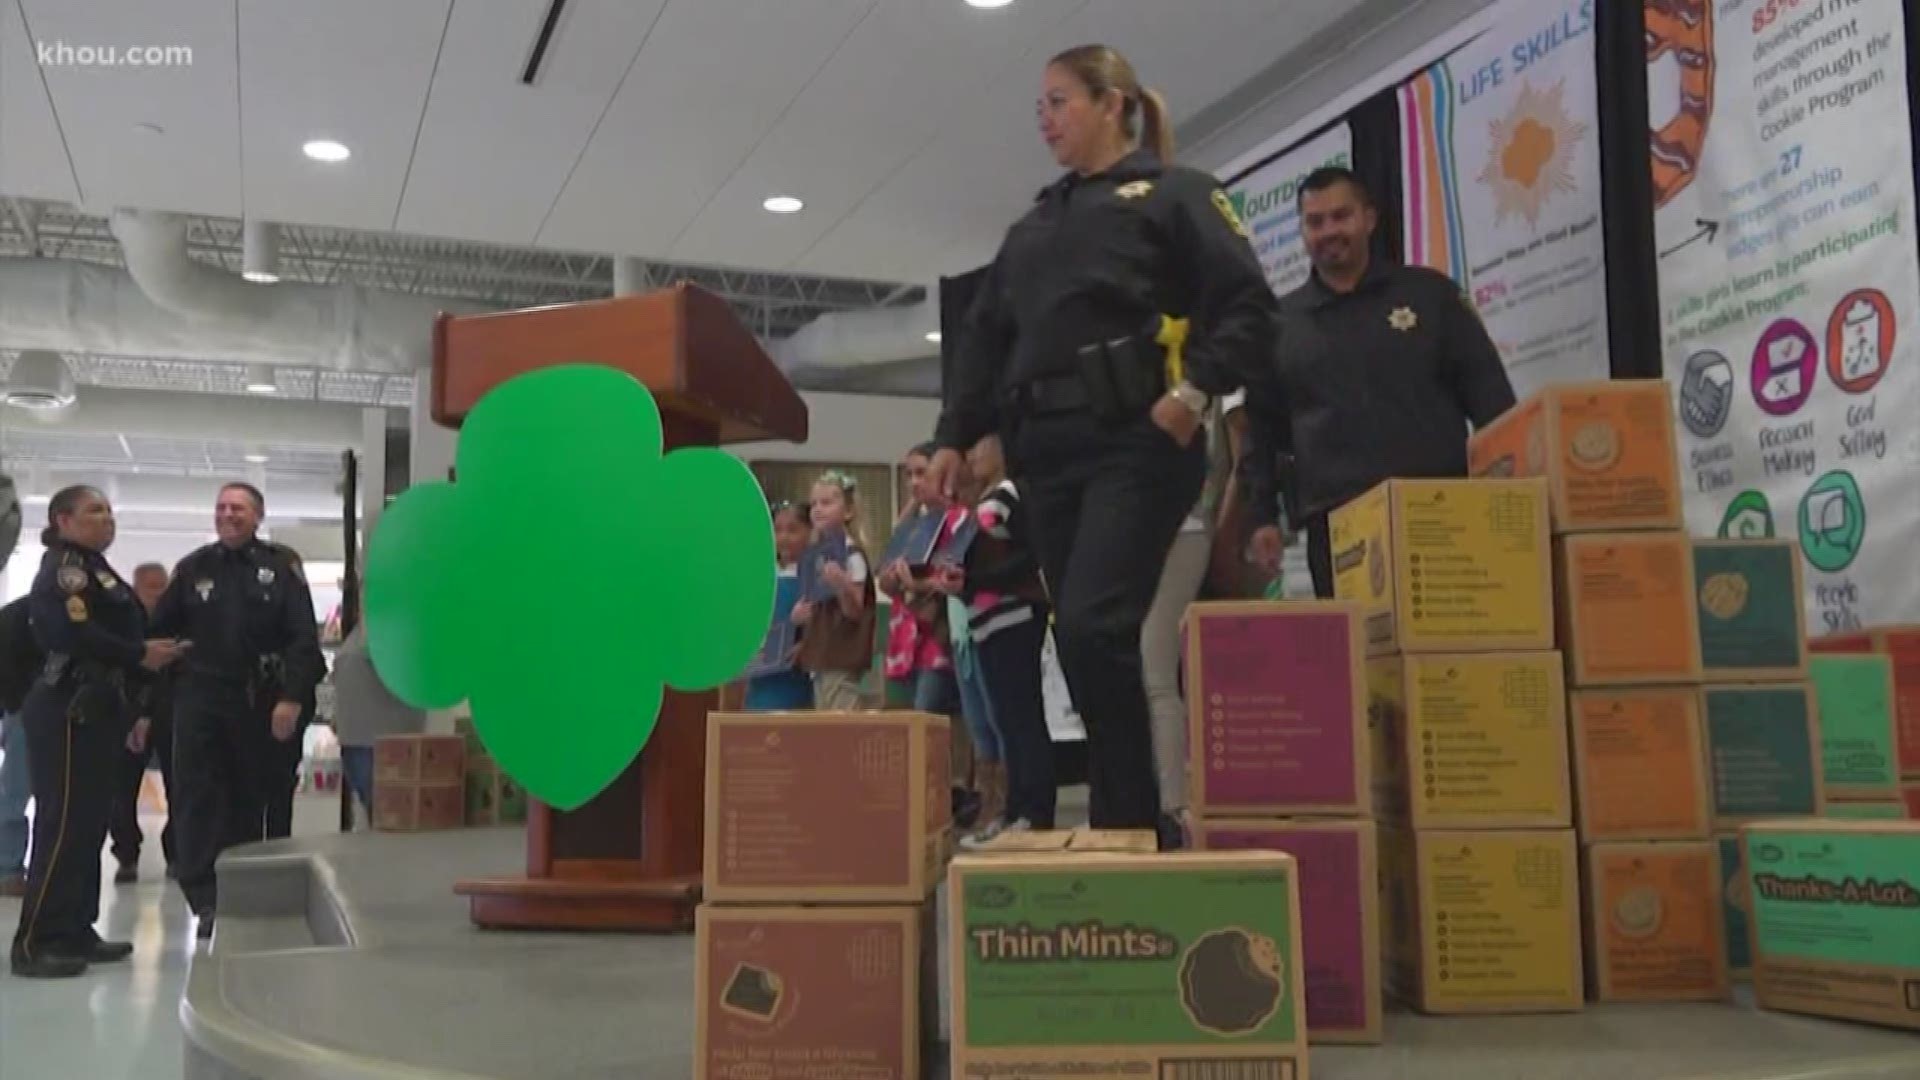 Some Girl Scouts are standing for Houston by honoring first responders with cookies to say thank you.